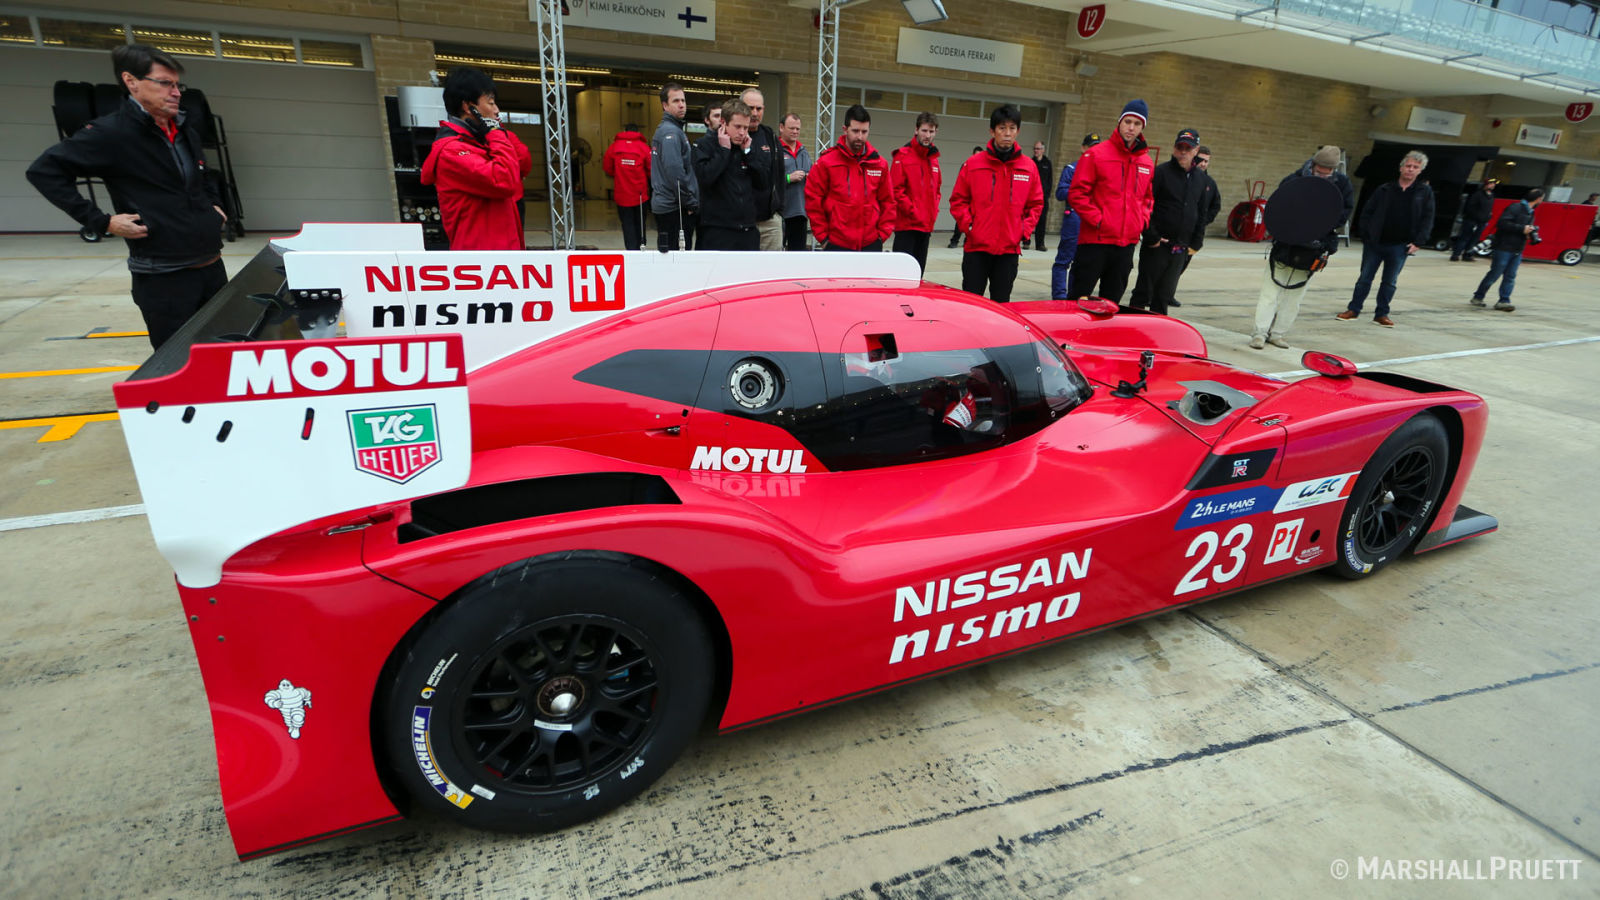 NISMO parked